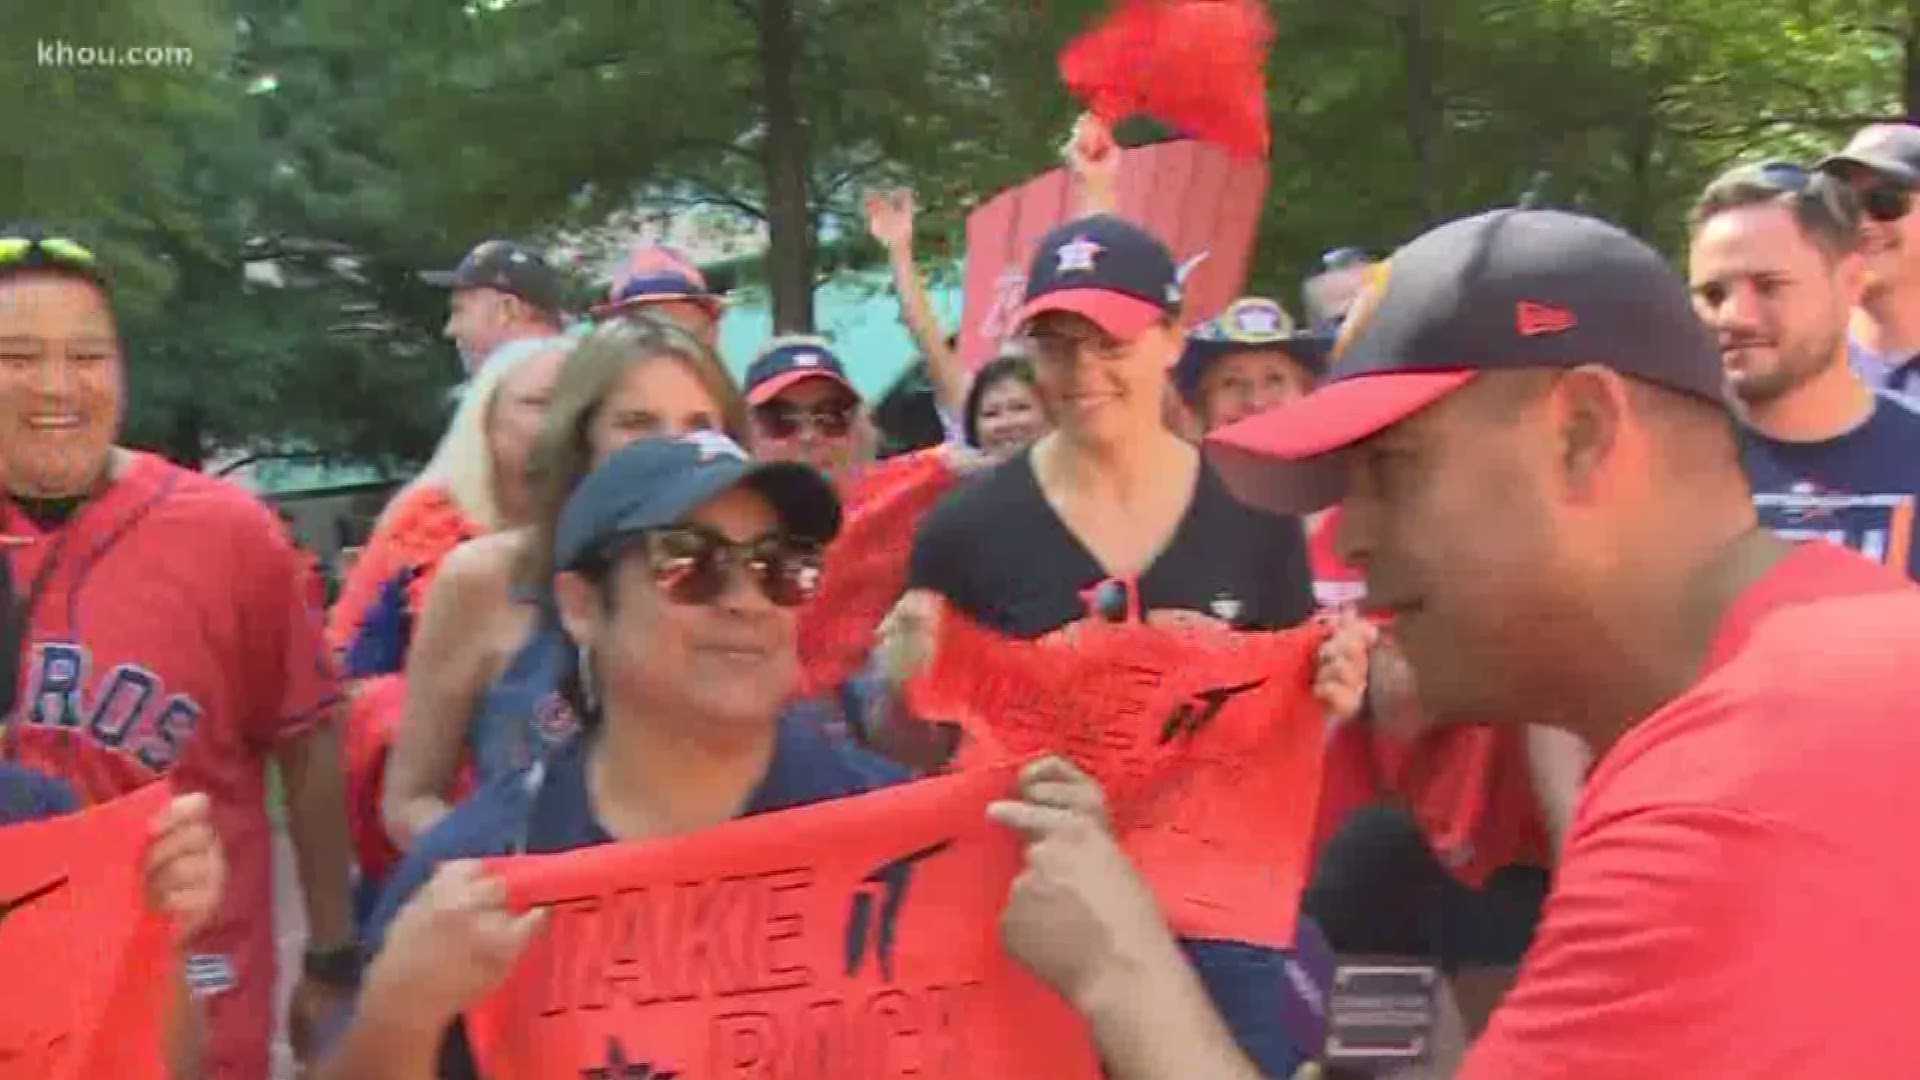 Houston Astros fans are ready for Game 1 of the American League Division Series against the Tampa Bay Rays.